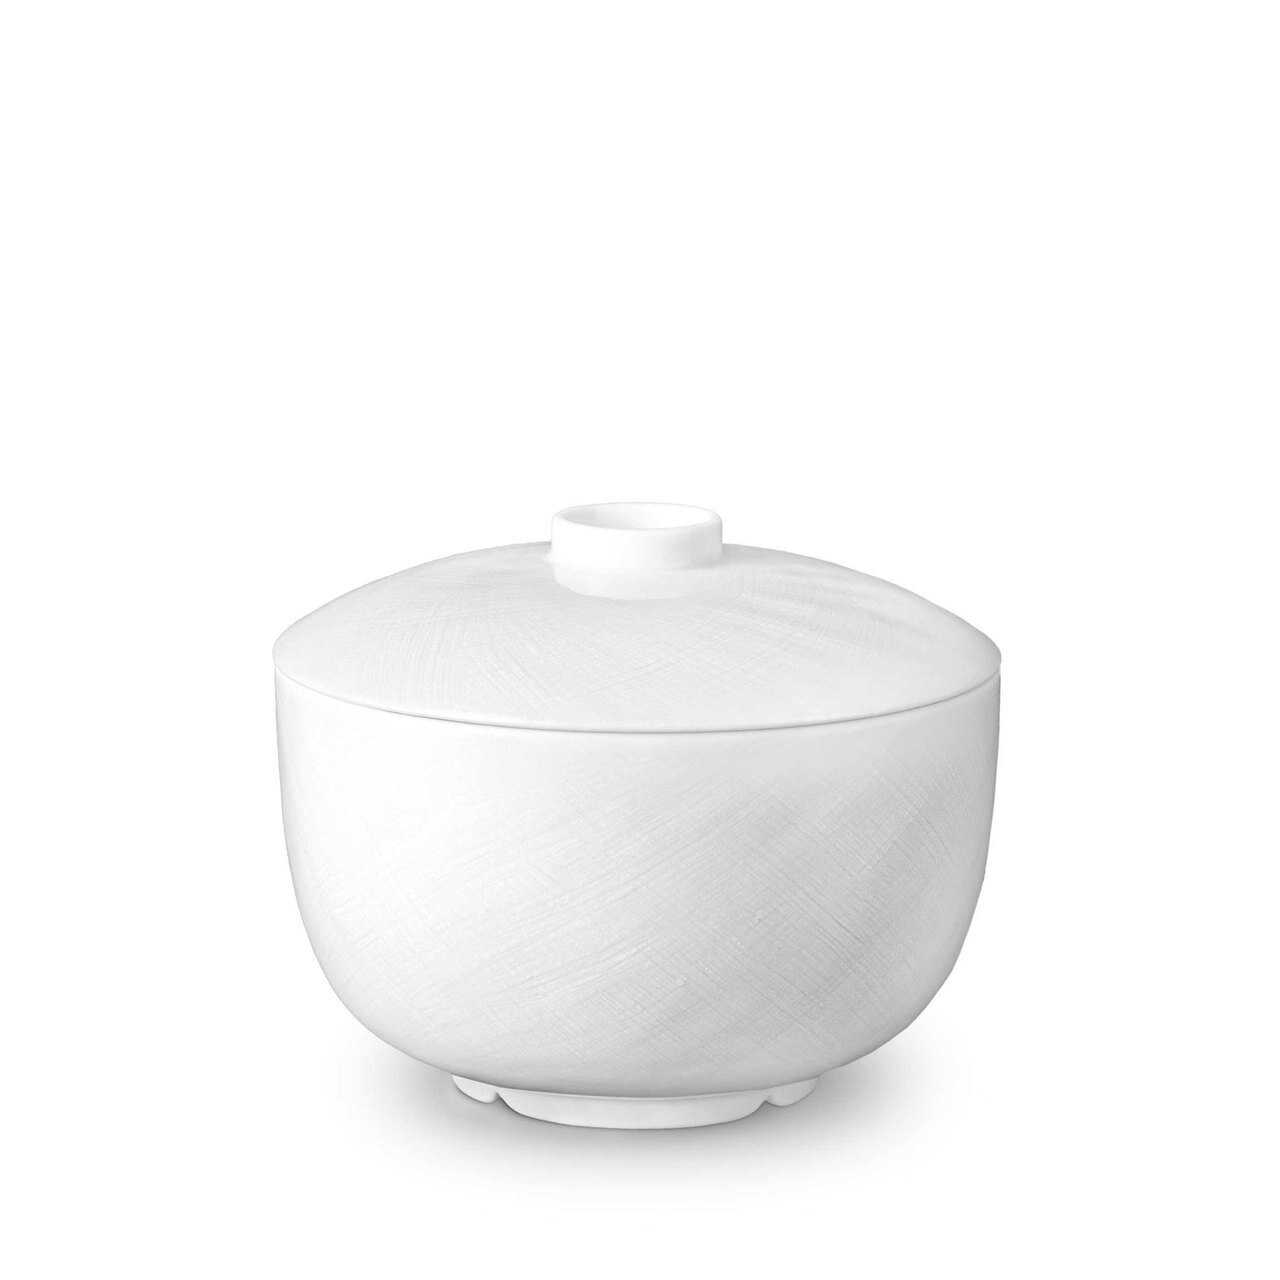 L'Objet Han Rice Bowl with Lid White